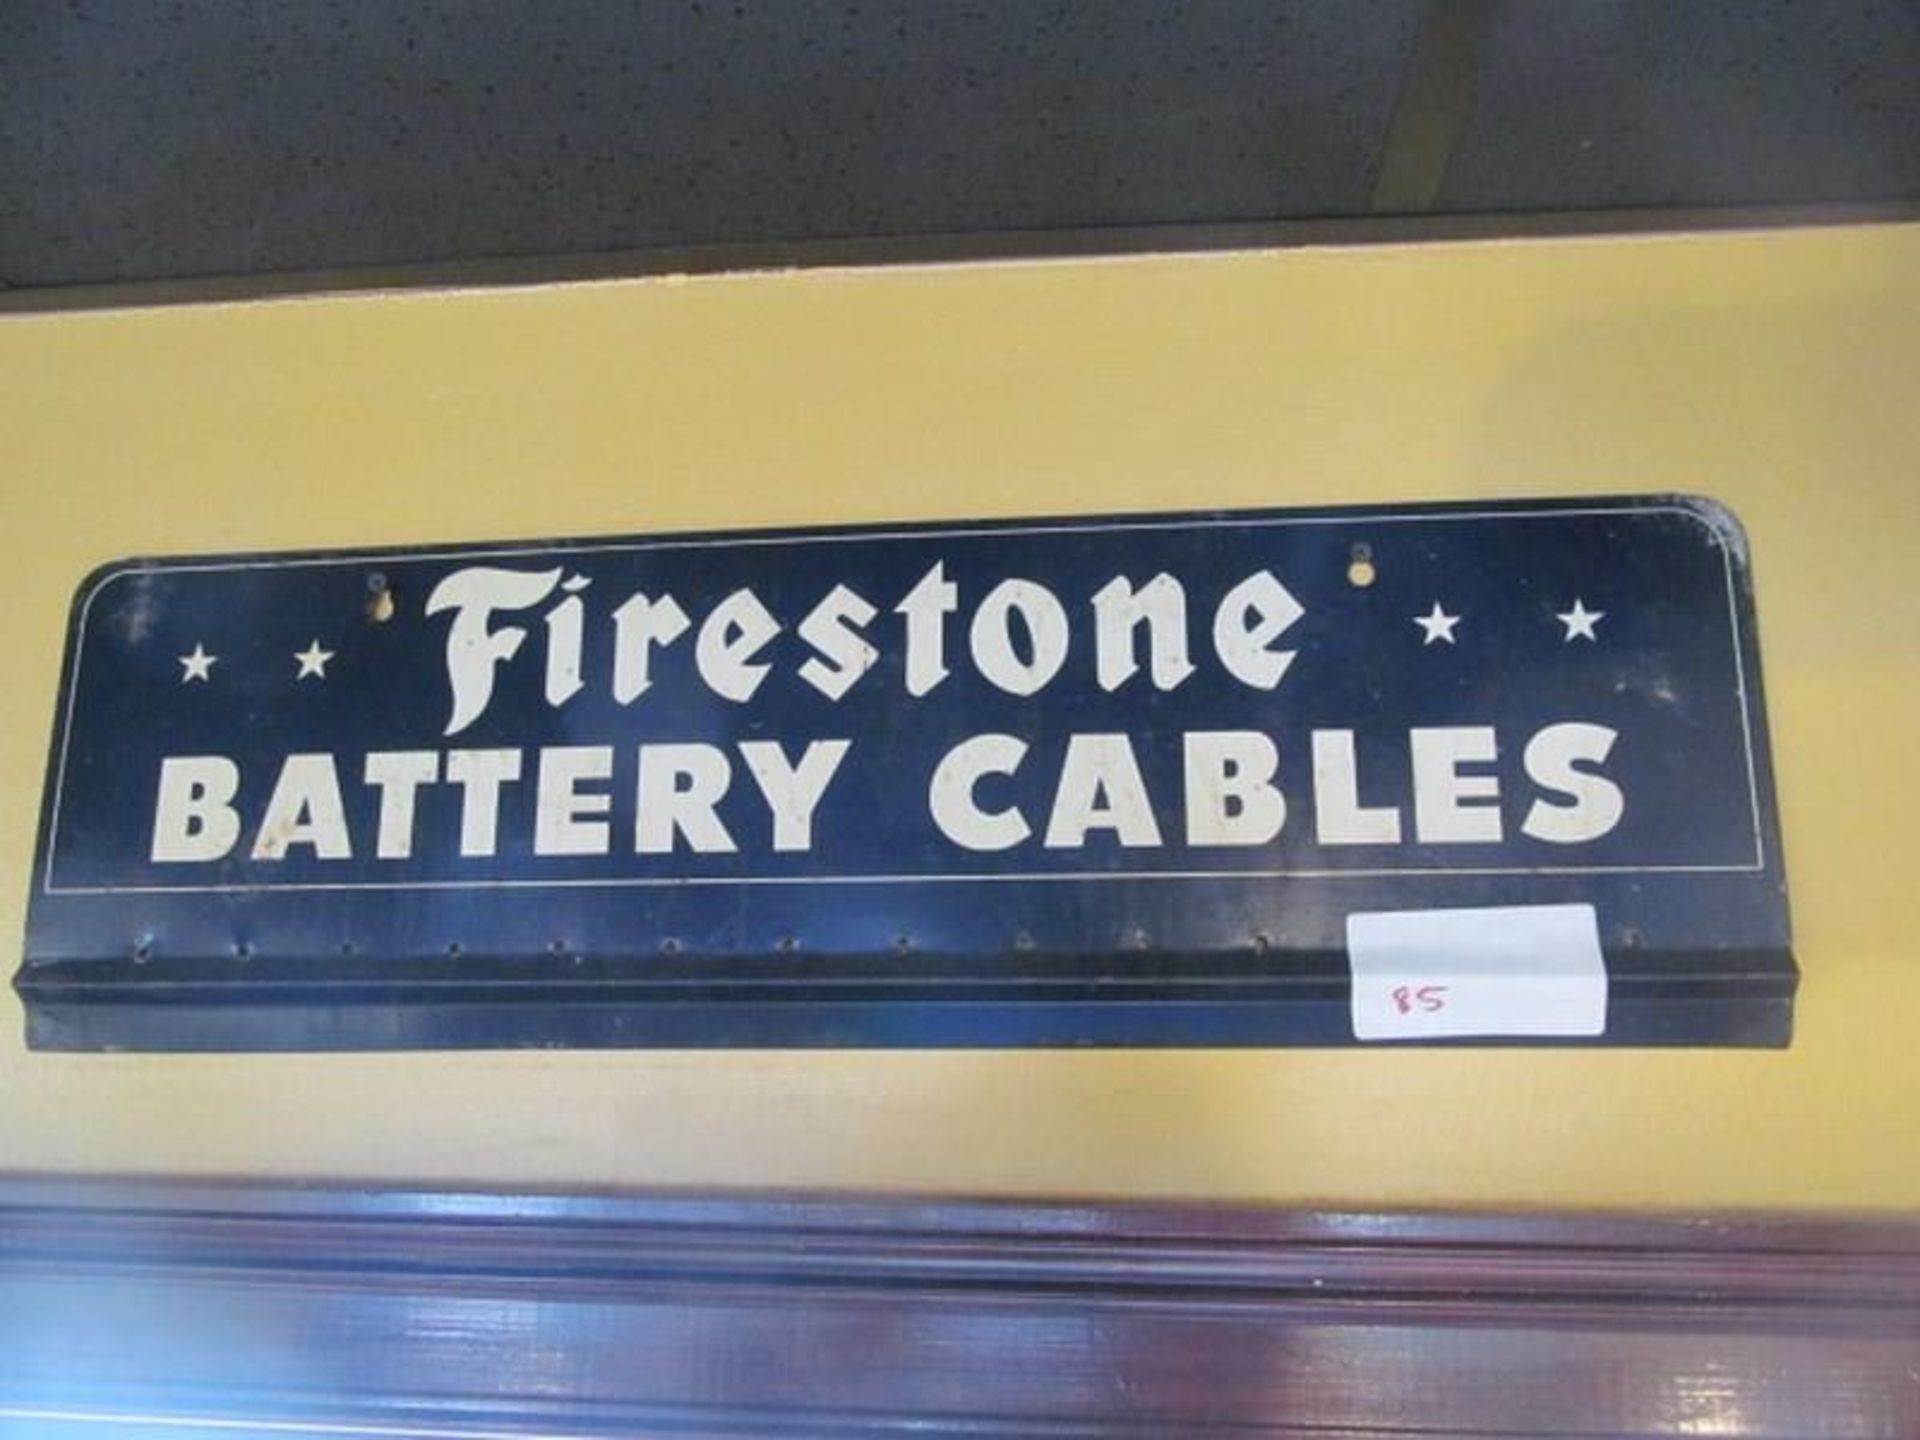 Firestone Battery Cables Metal Sign